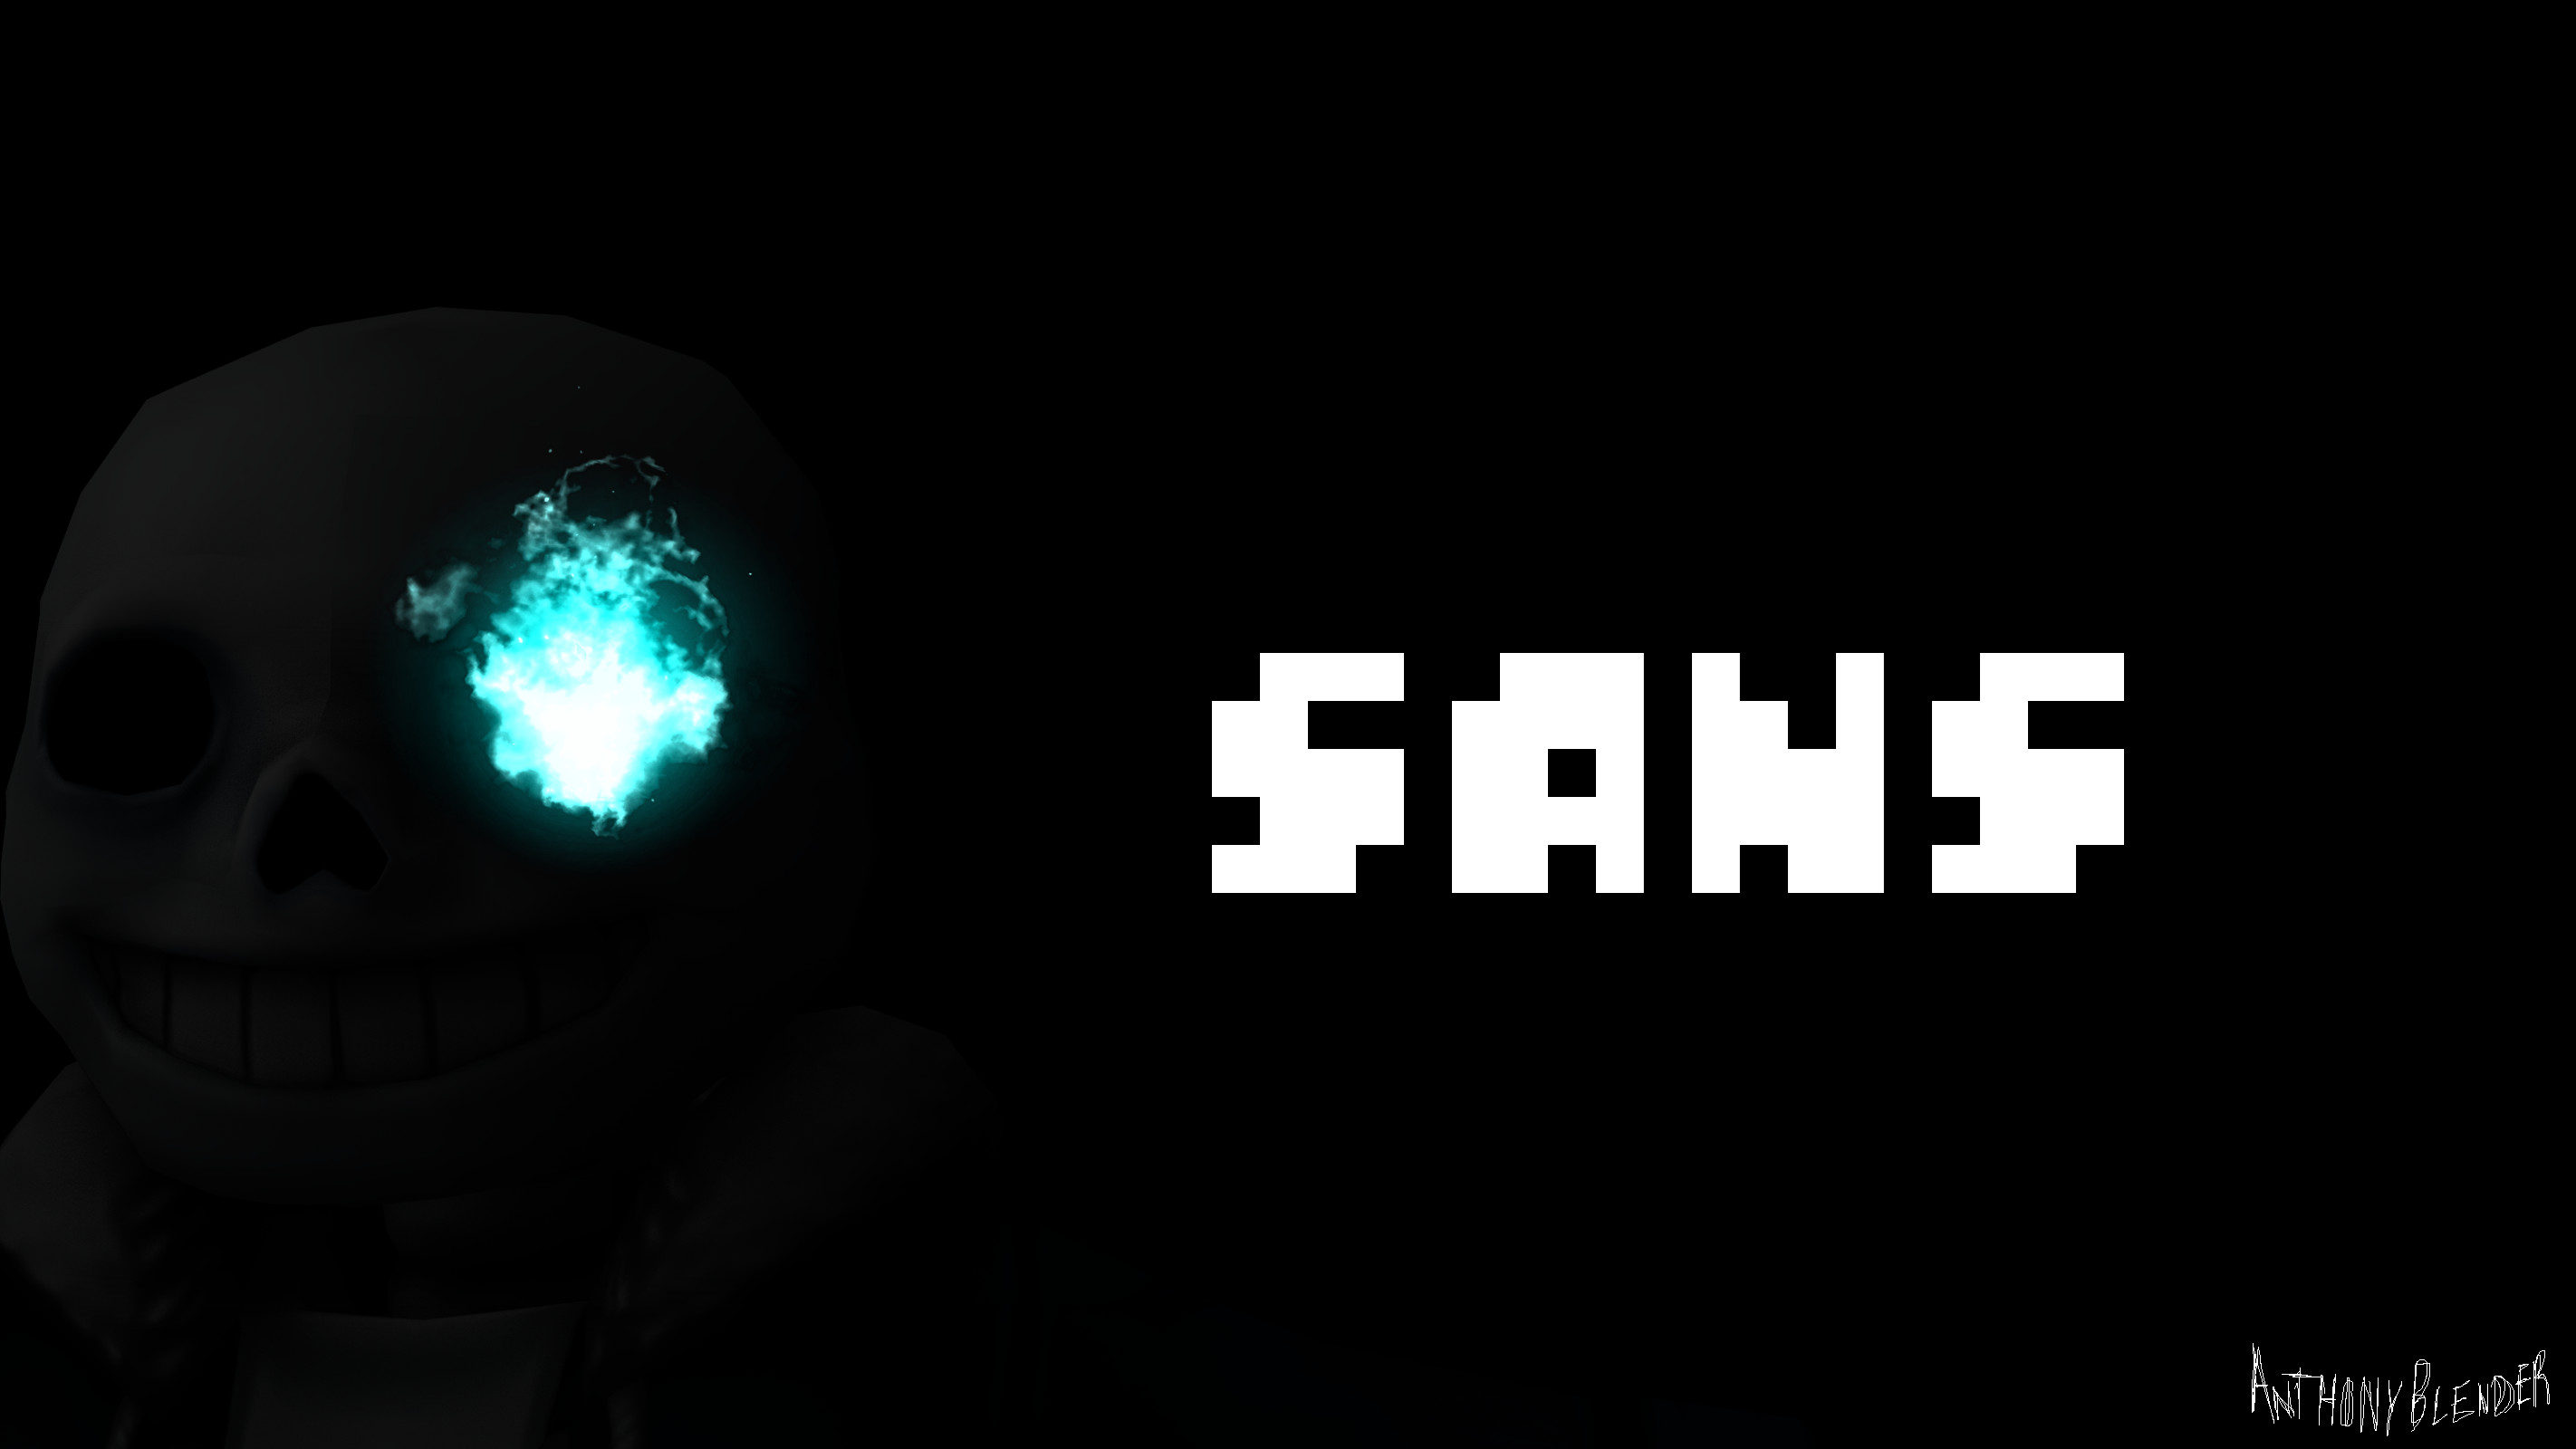 Undertale – Both Sides of Sans HD Wallpaper by Phione538